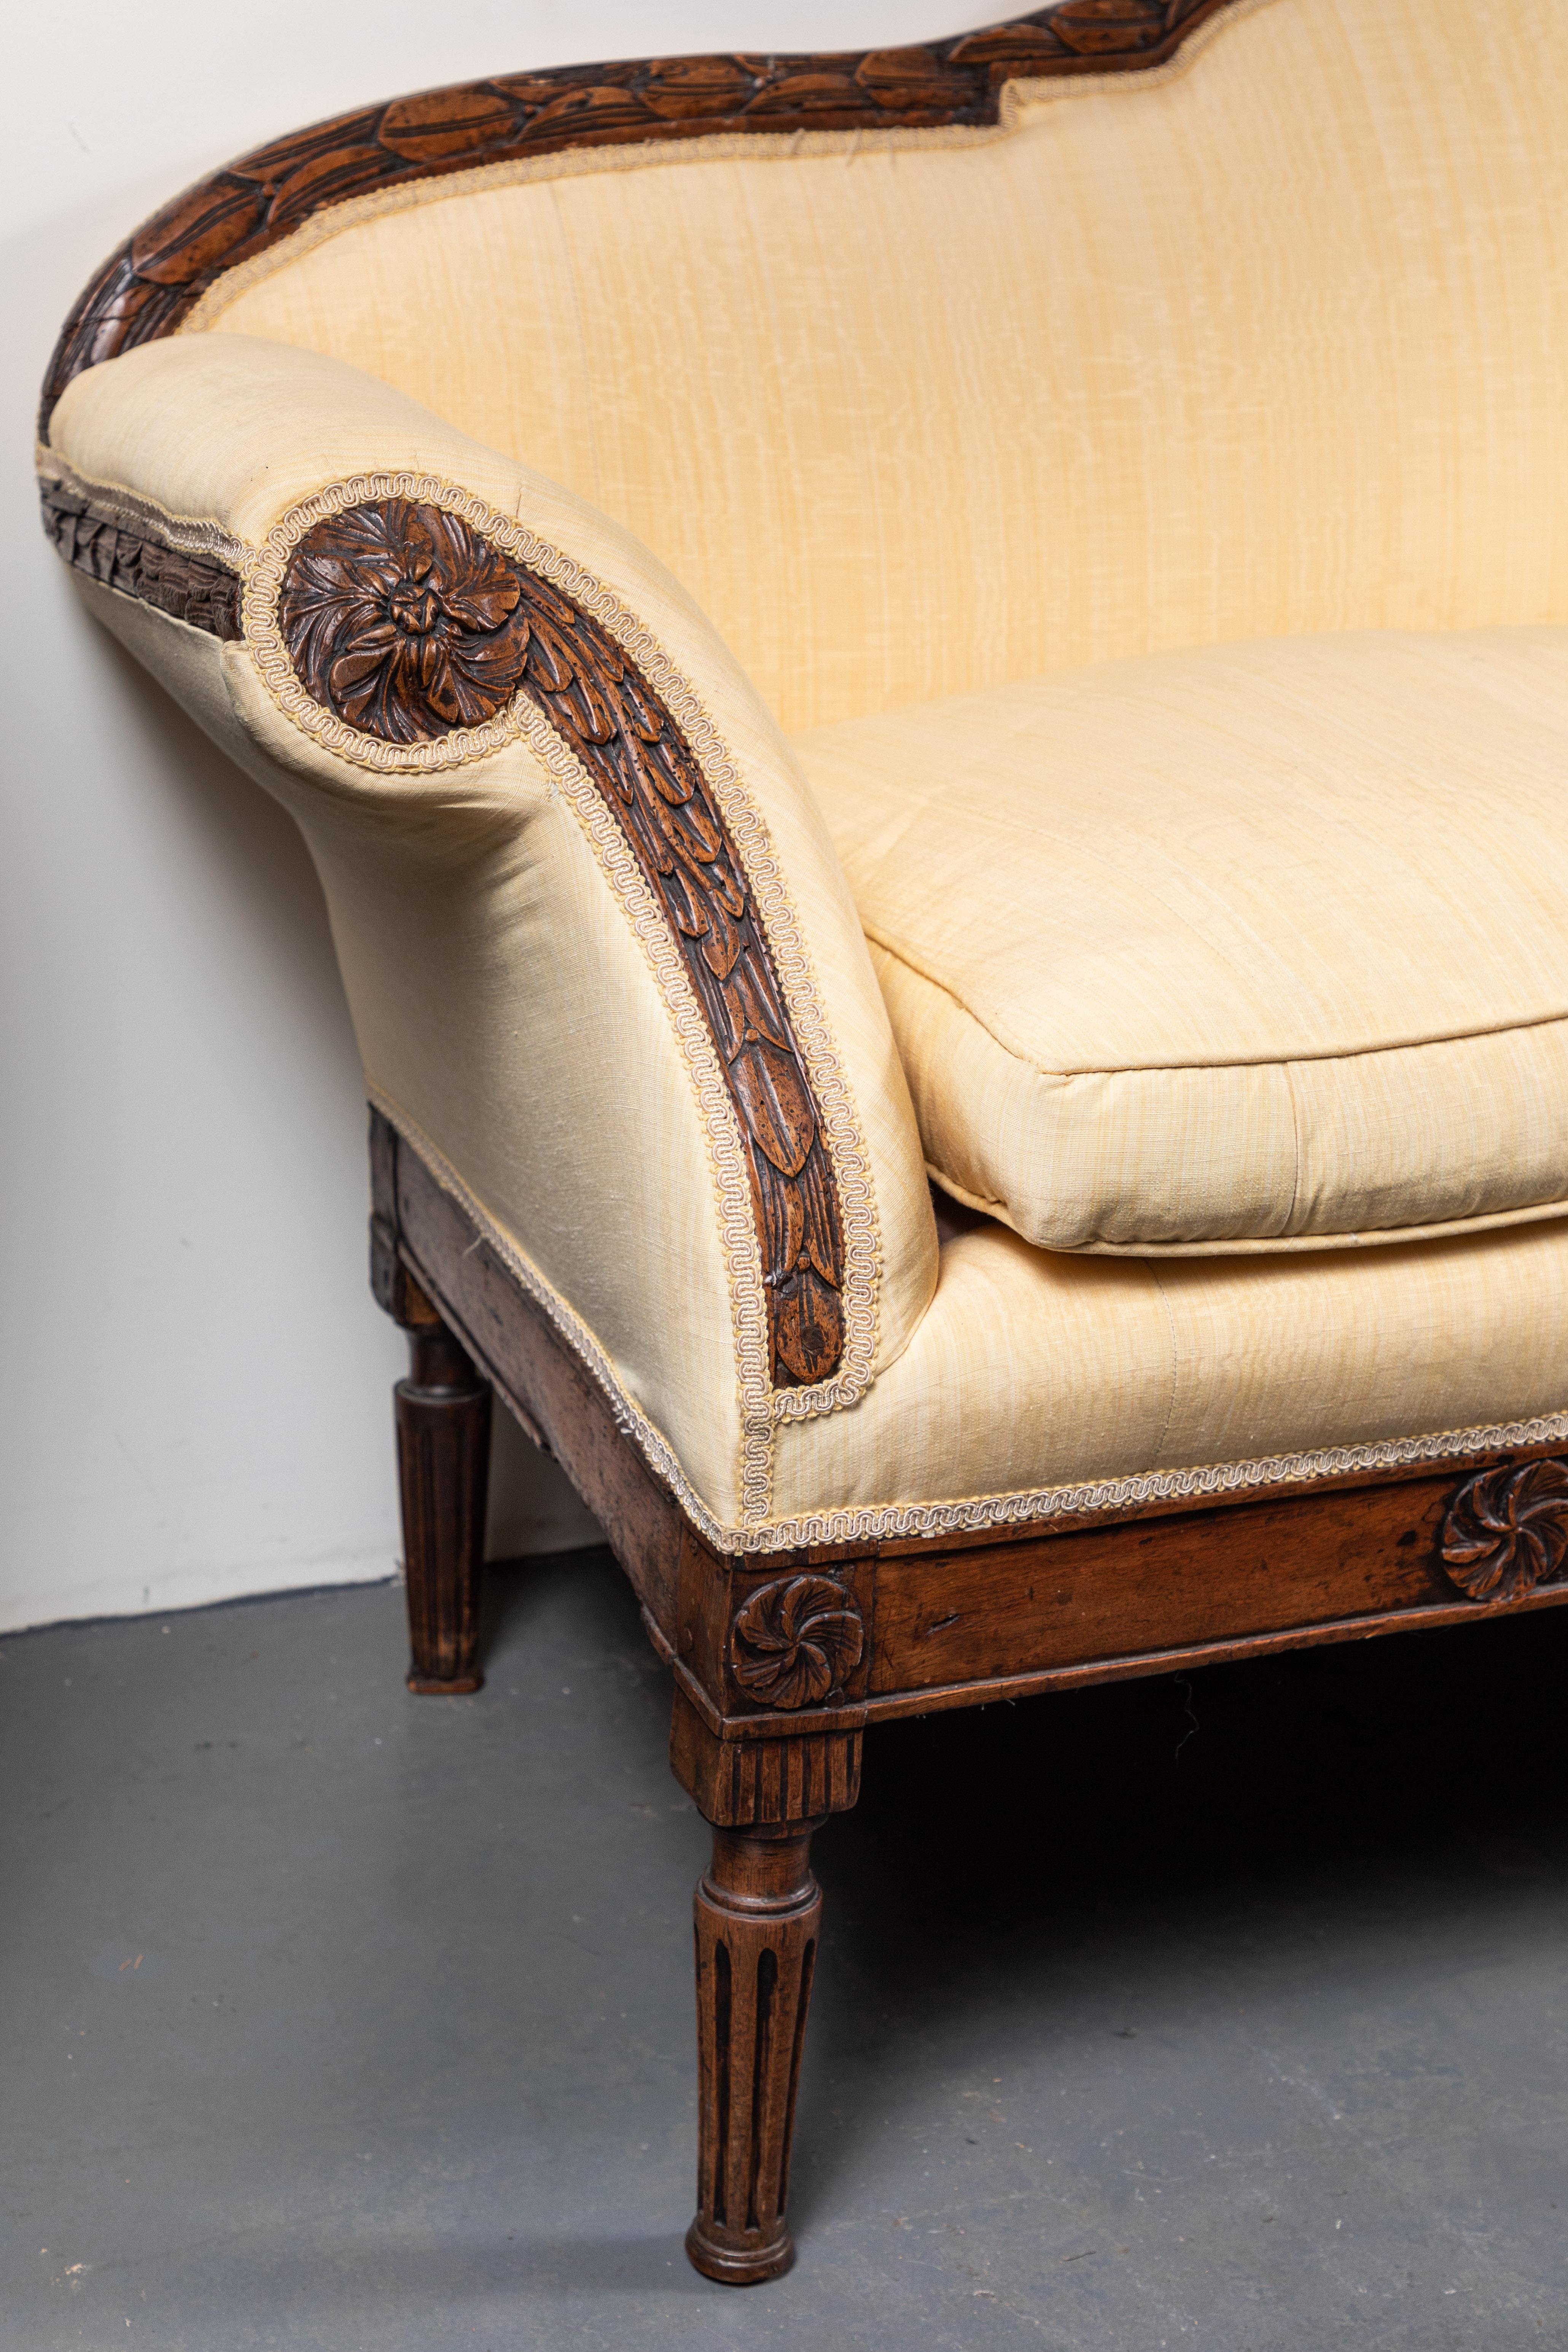 Hand carved, solid walnut, flared-arm sofa from Florence, Italy. The serpentine top rail, splayed arms, and elegant apron are filled with foliate reliefs.